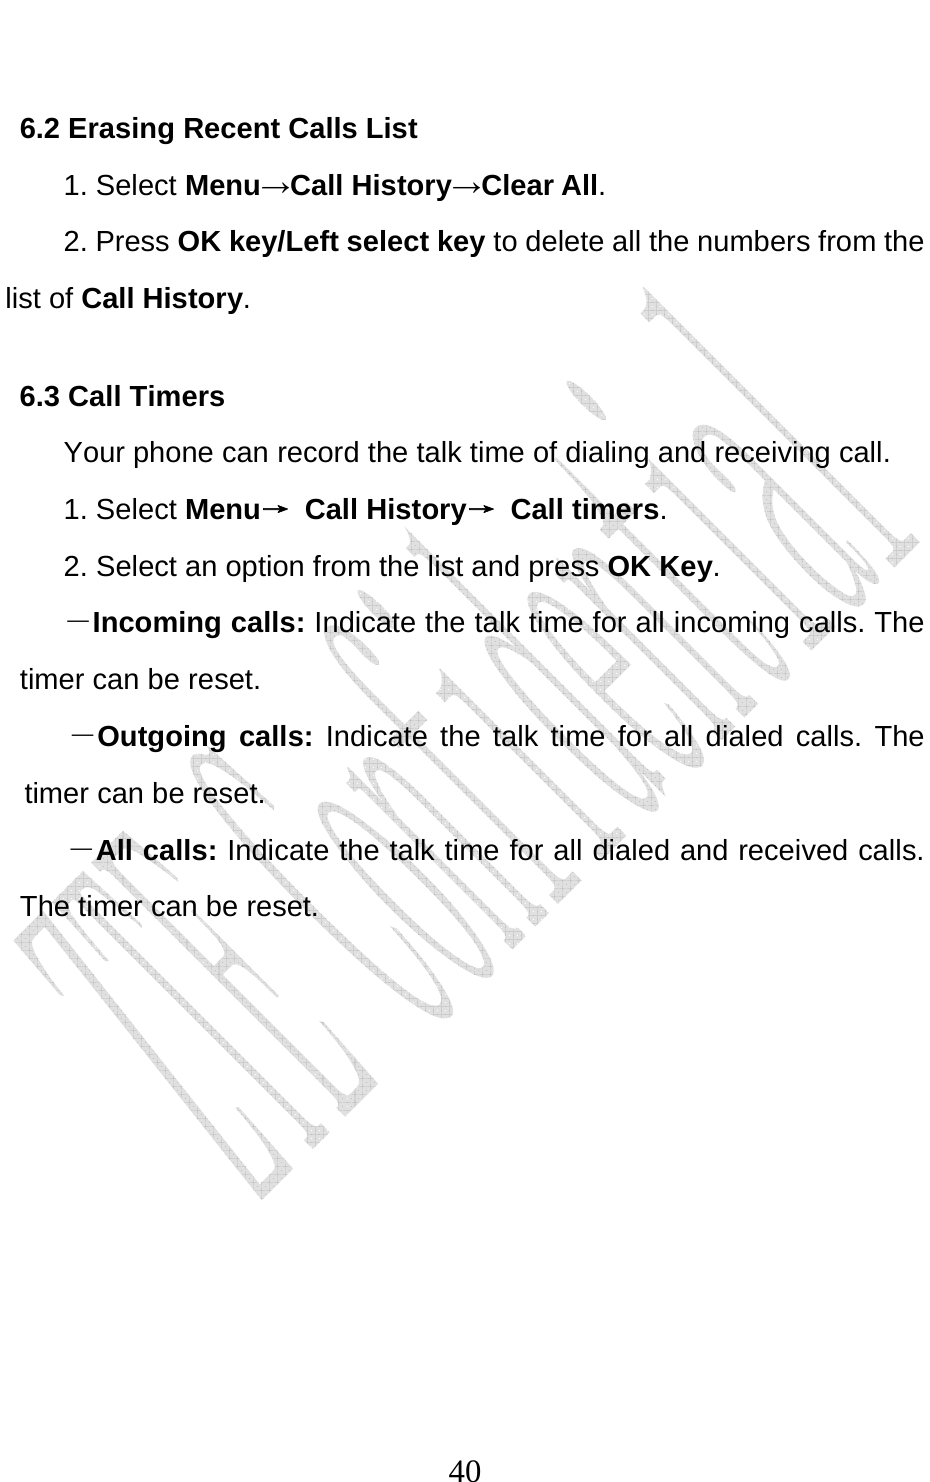                              406.2 Erasing Recent Calls List 1. Select Menu→Call History→Clear All. 2. Press OK key/Left select key to delete all the numbers from the list of Call History. 6.3 Call Timers Your phone can record the talk time of dialing and receiving call. 1. Select Menu→ Call History→ Call timers. 2. Select an option from the list and press OK Key. －Incoming calls: Indicate the talk time for all incoming calls. The timer can be reset.   －Outgoing calls: Indicate the talk time for all dialed calls. The timer can be reset.   －All calls: Indicate the talk time for all dialed and received calls. The timer can be reset.    